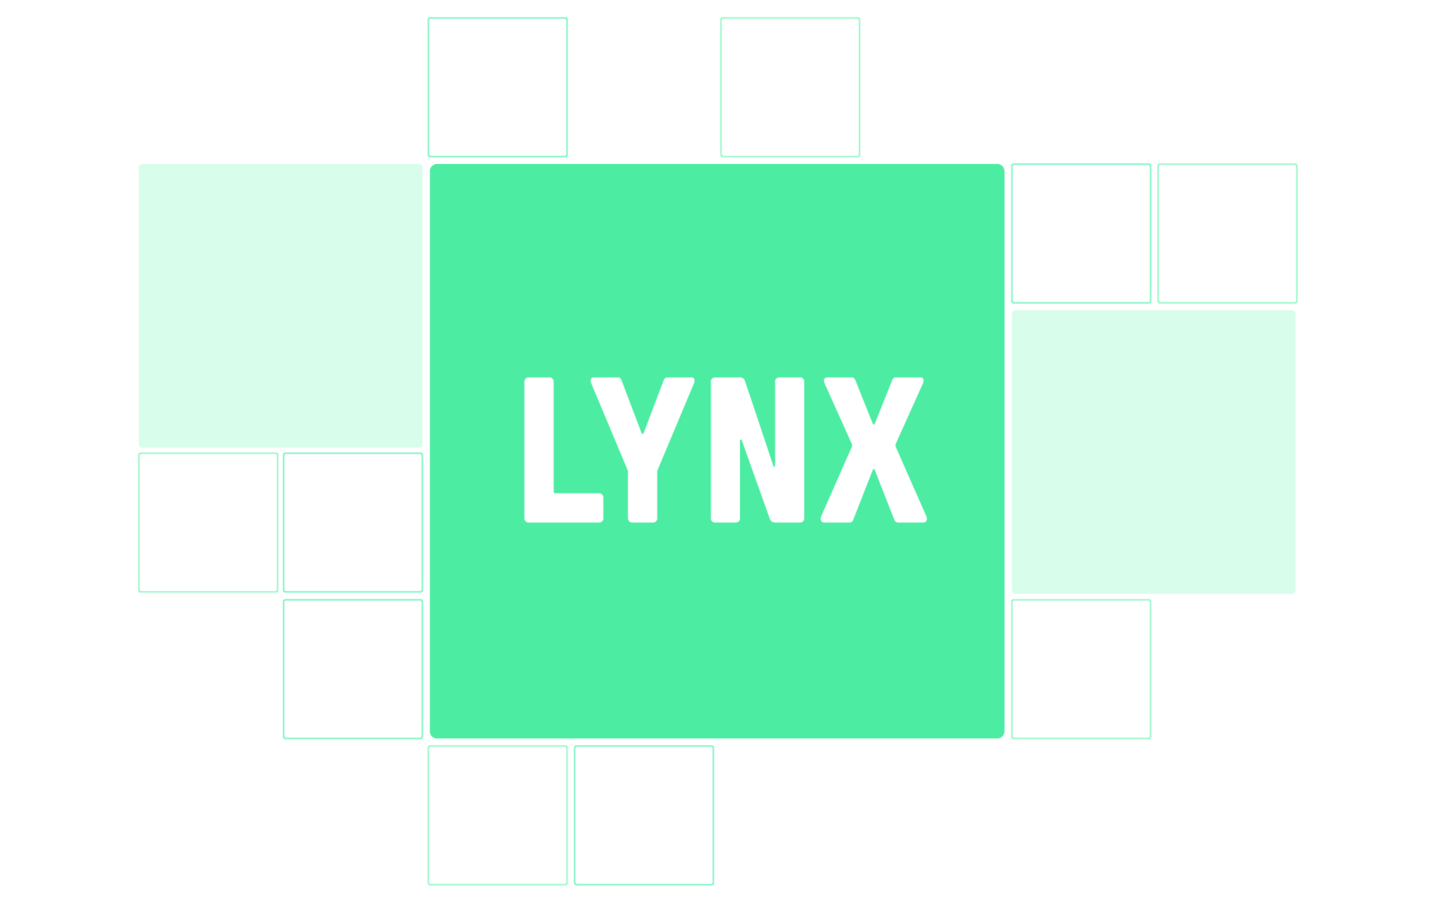 About LYNX